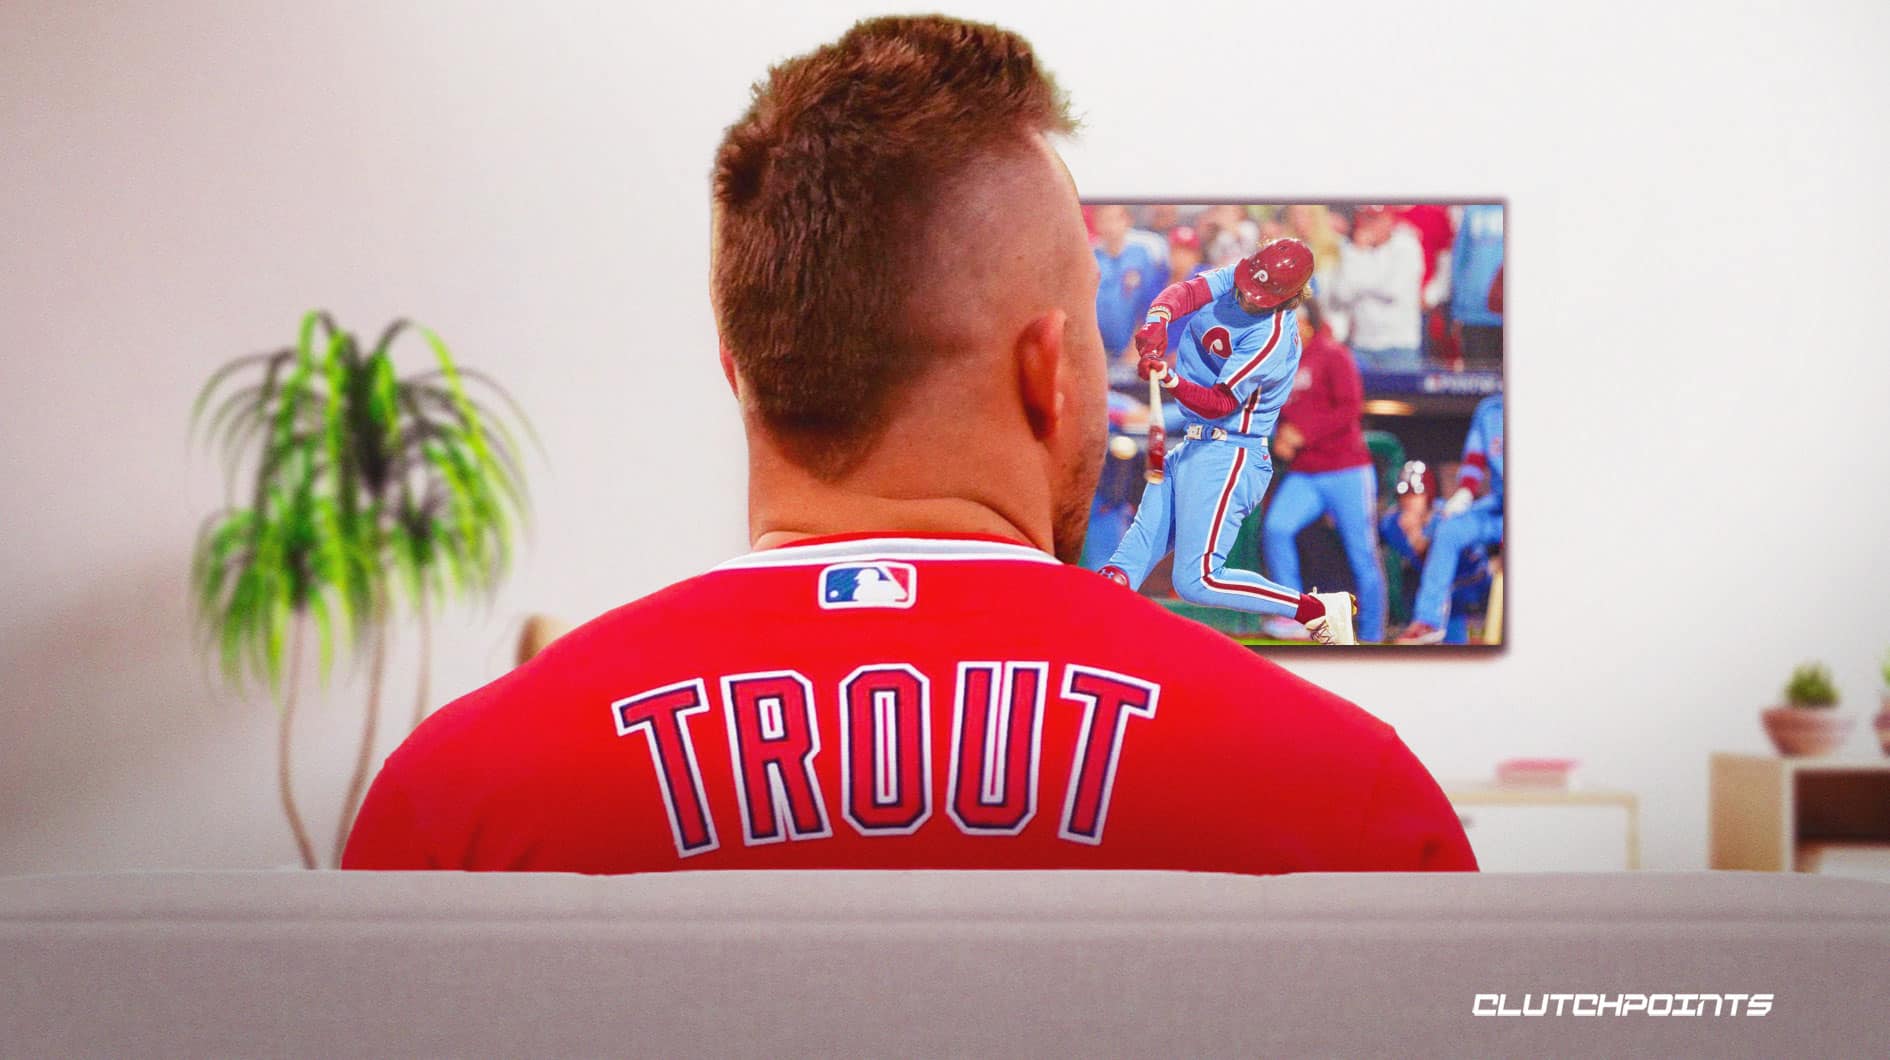 Bryce Harper, Mike Trout, Phillies, Angels